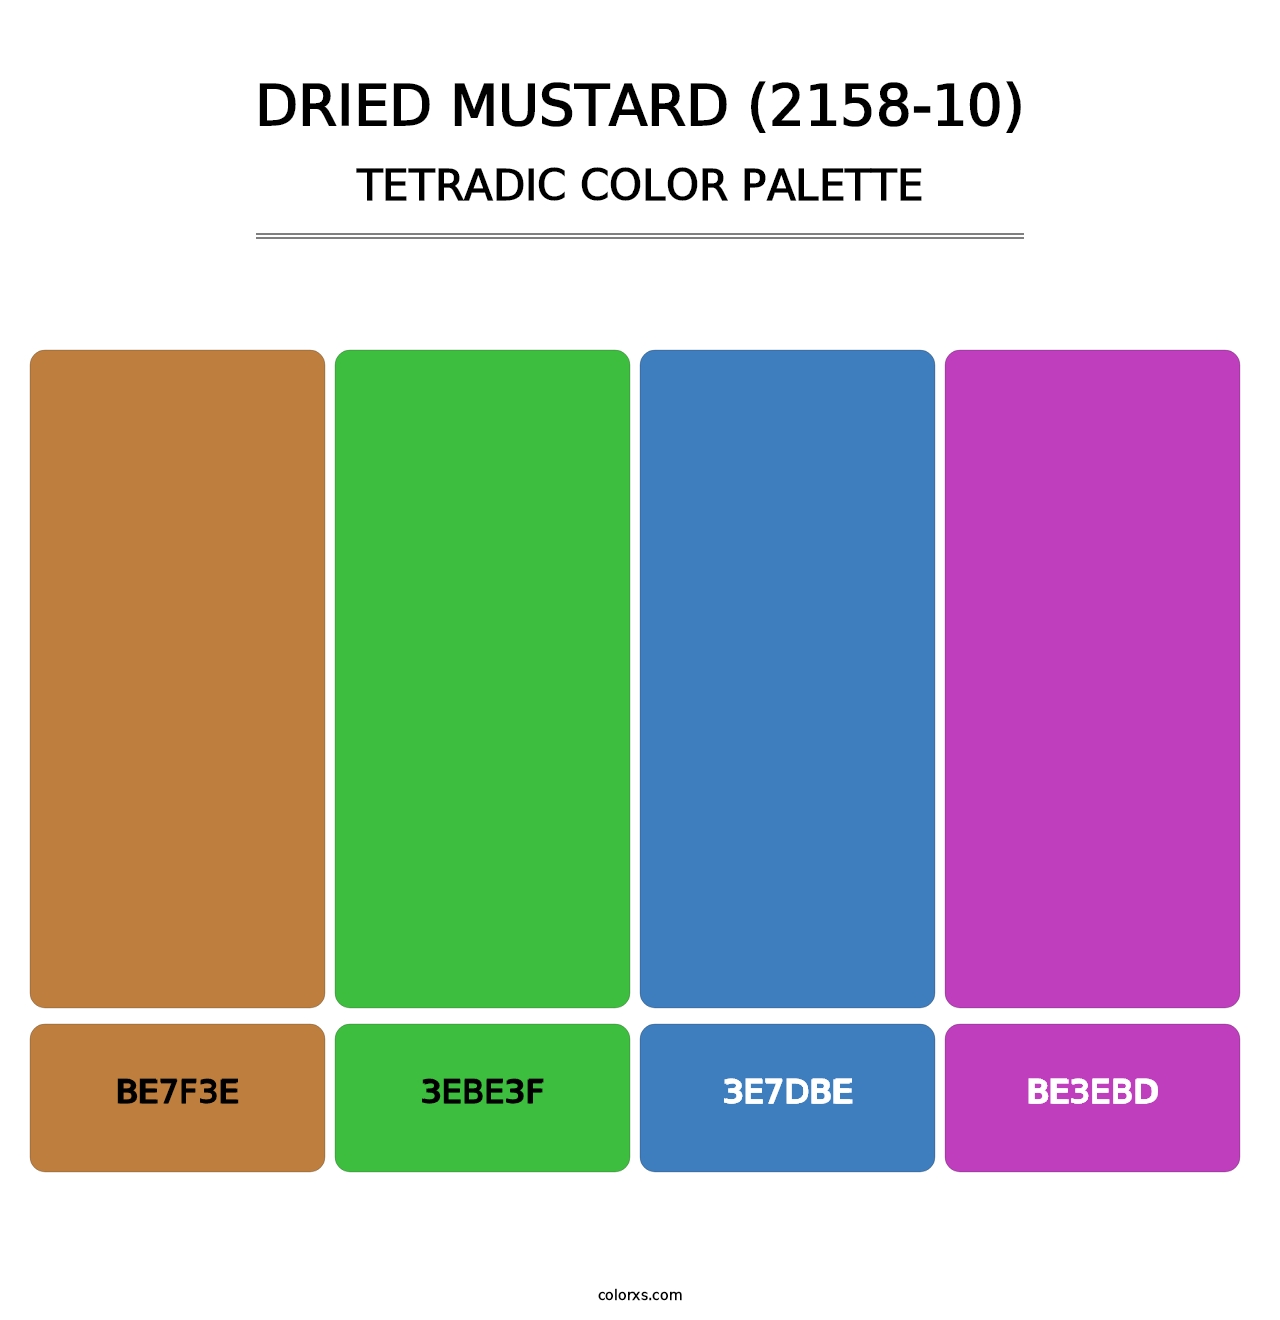 Dried Mustard (2158-10) - Tetradic Color Palette